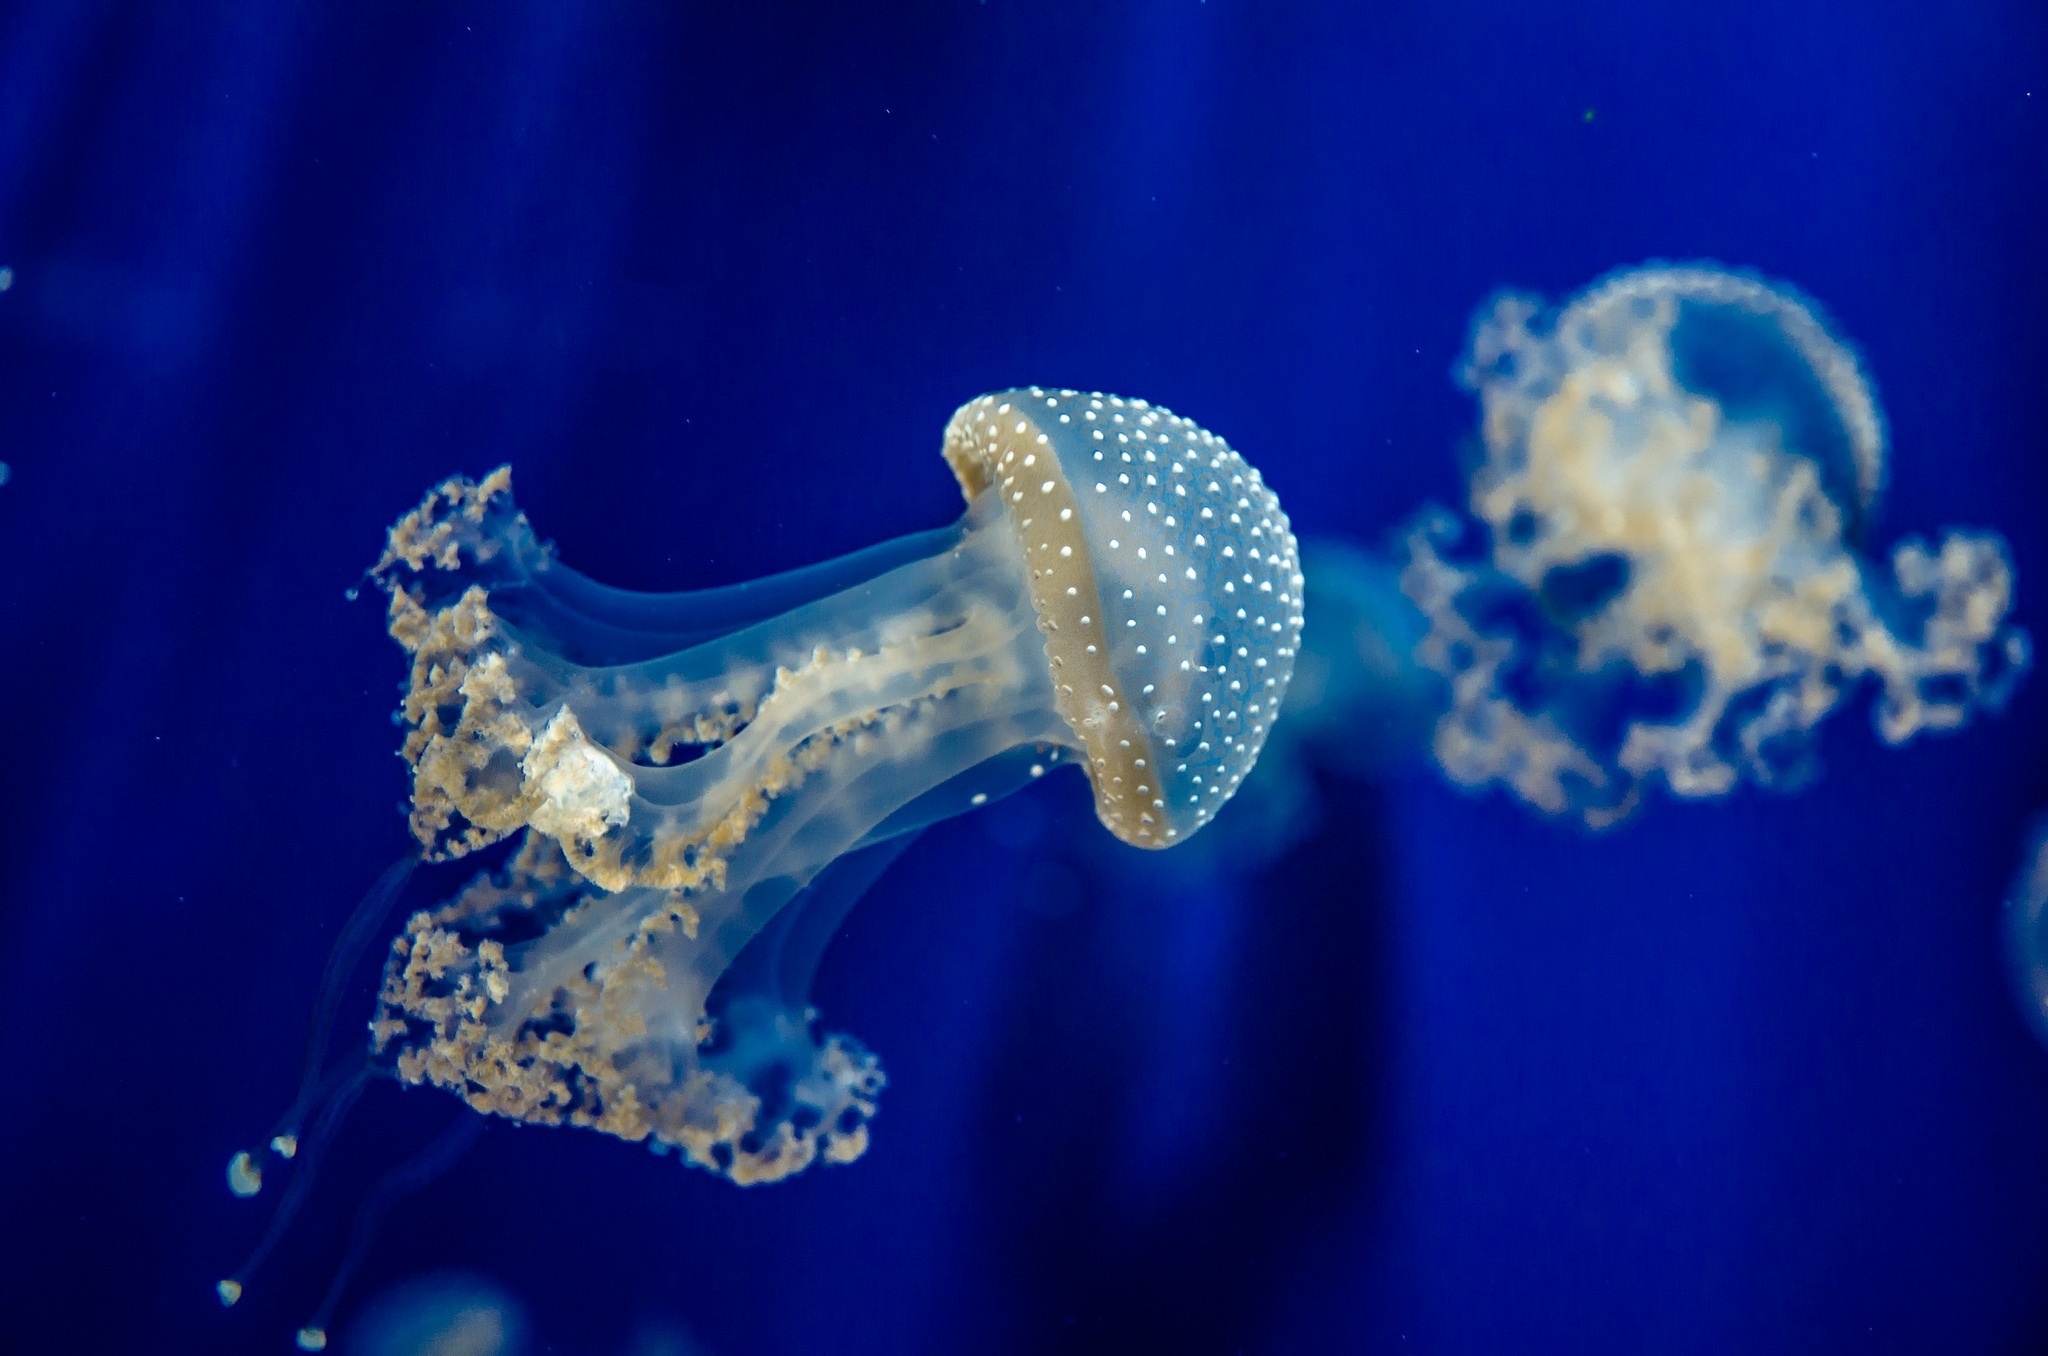 152491 download wallpaper miscellaneous, miscellanea, sea, jellyfish, underwater world screensavers and pictures for free